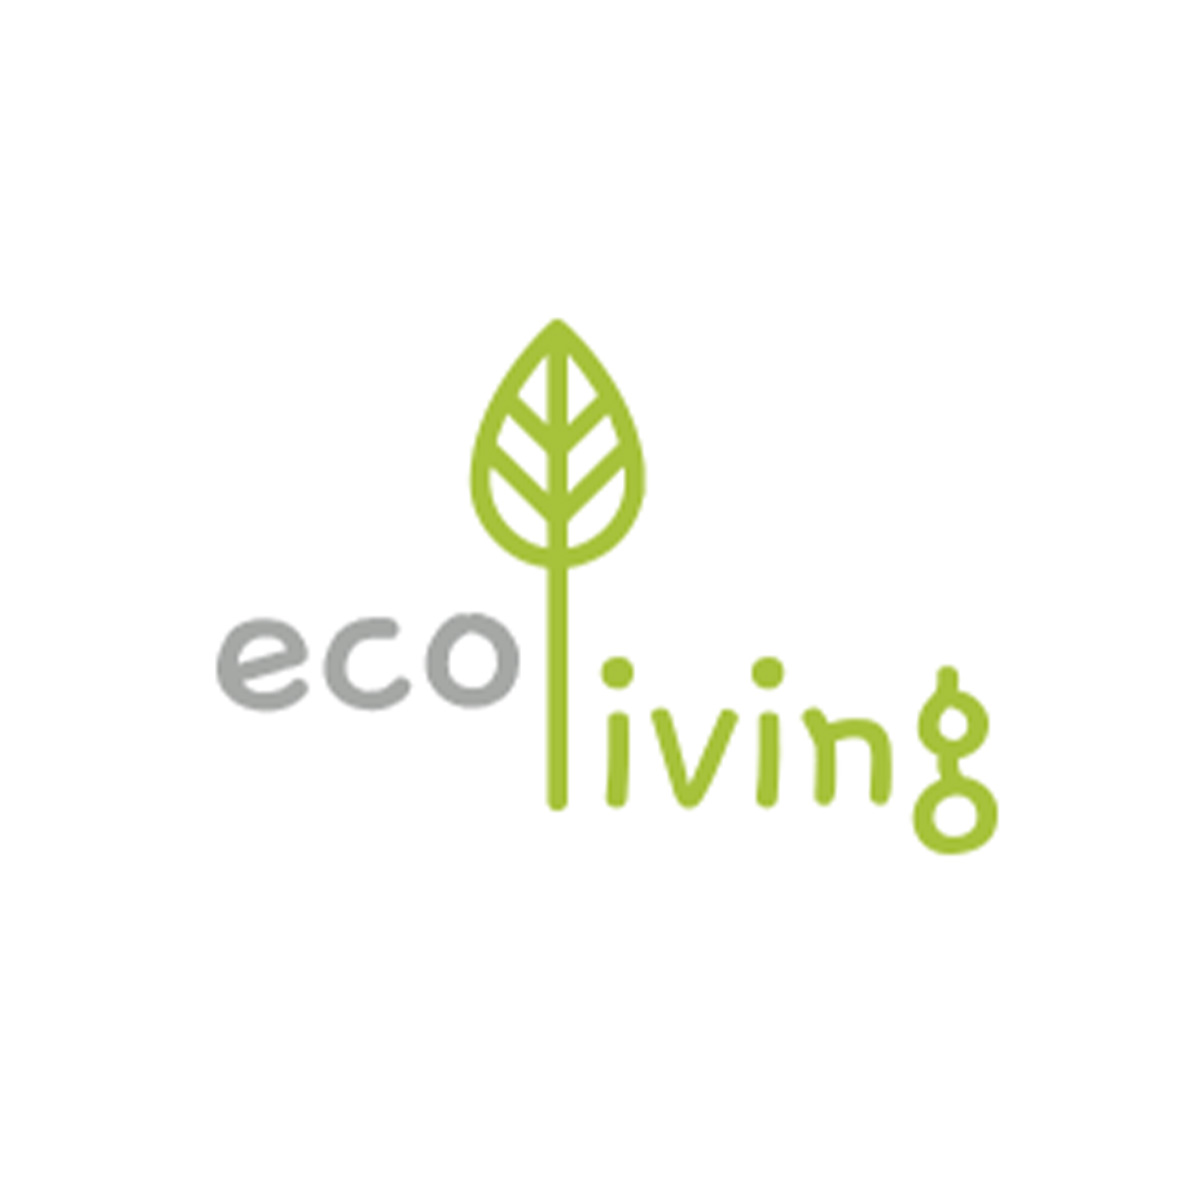 ecoLiving